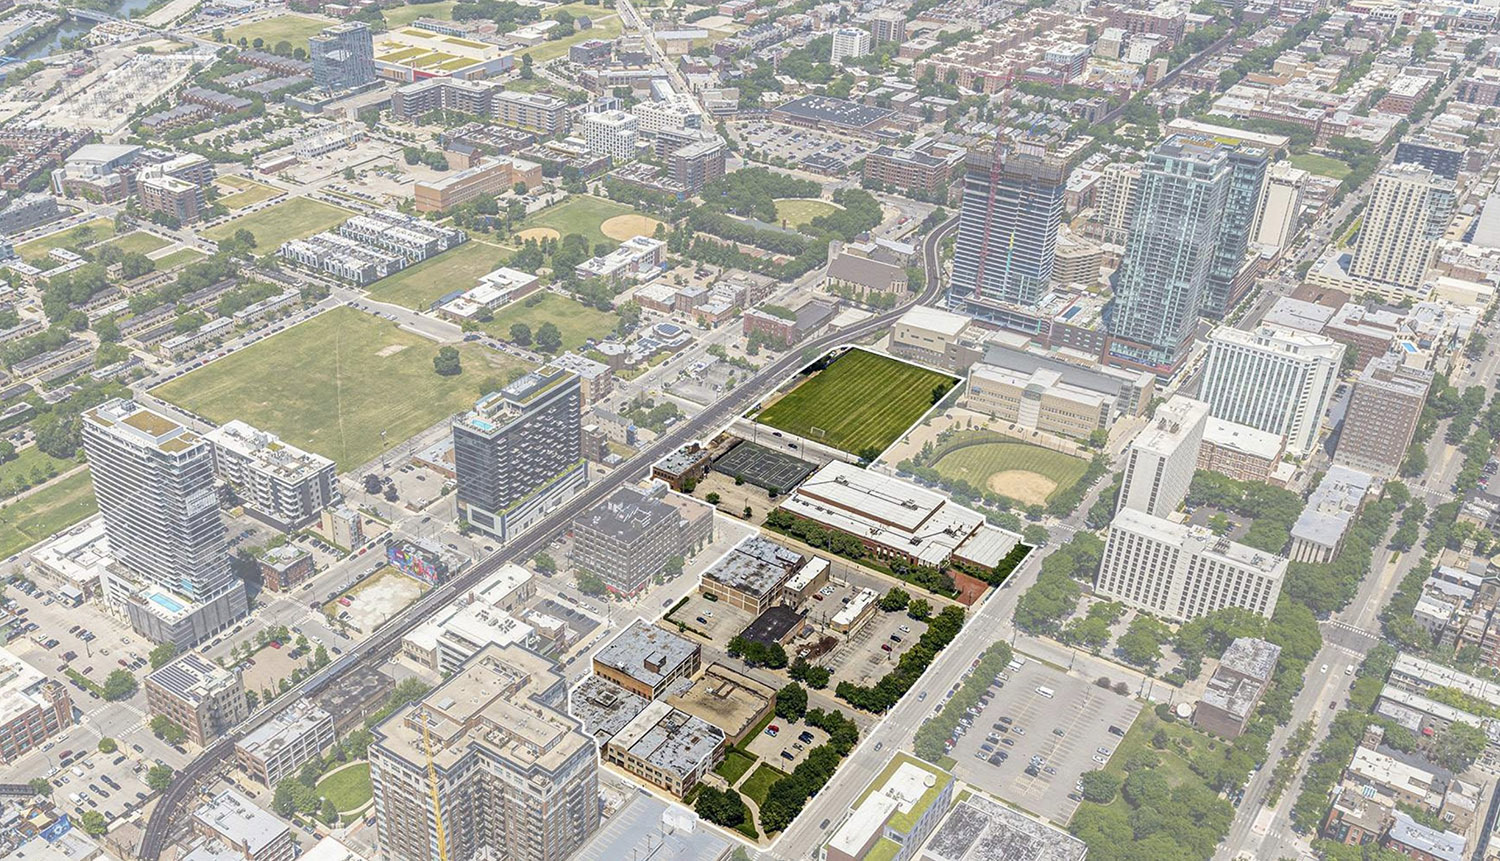 Aerial View of North Union Site. Image by Hartshorne Plunkard Architecture